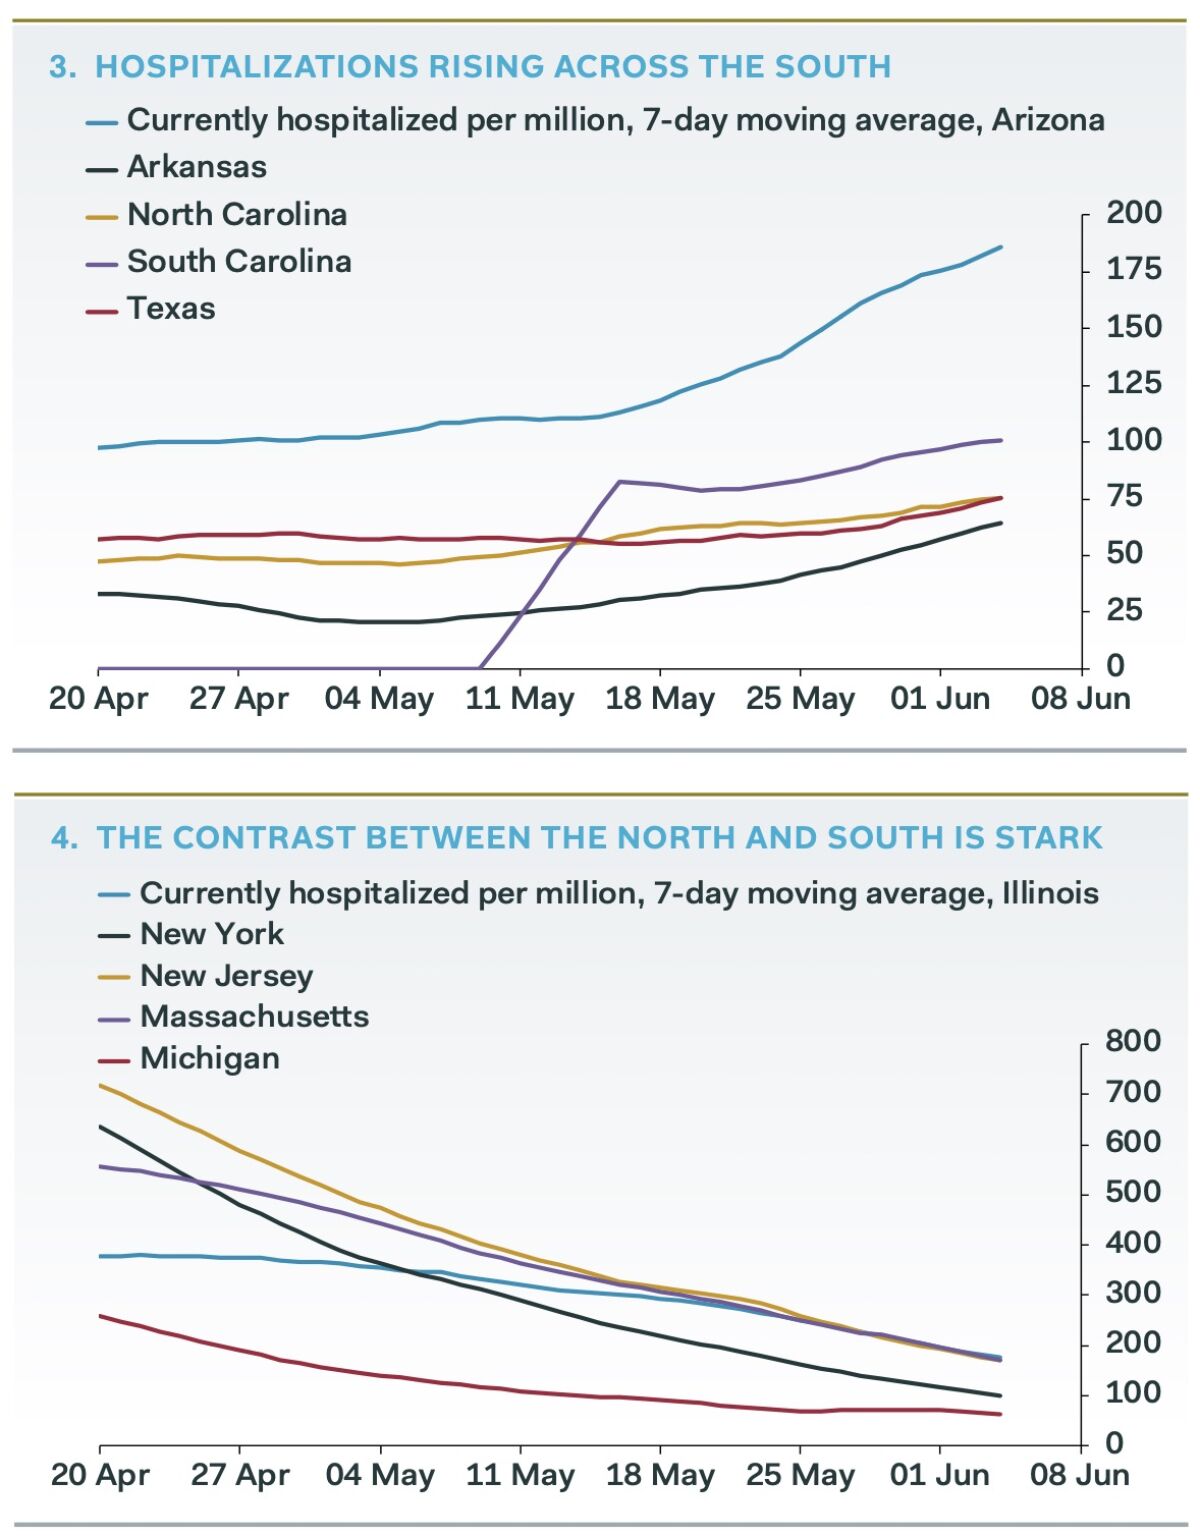 COVID-19 Hospitalizations are rising in the South but declining in states that saw earlier infection surges.